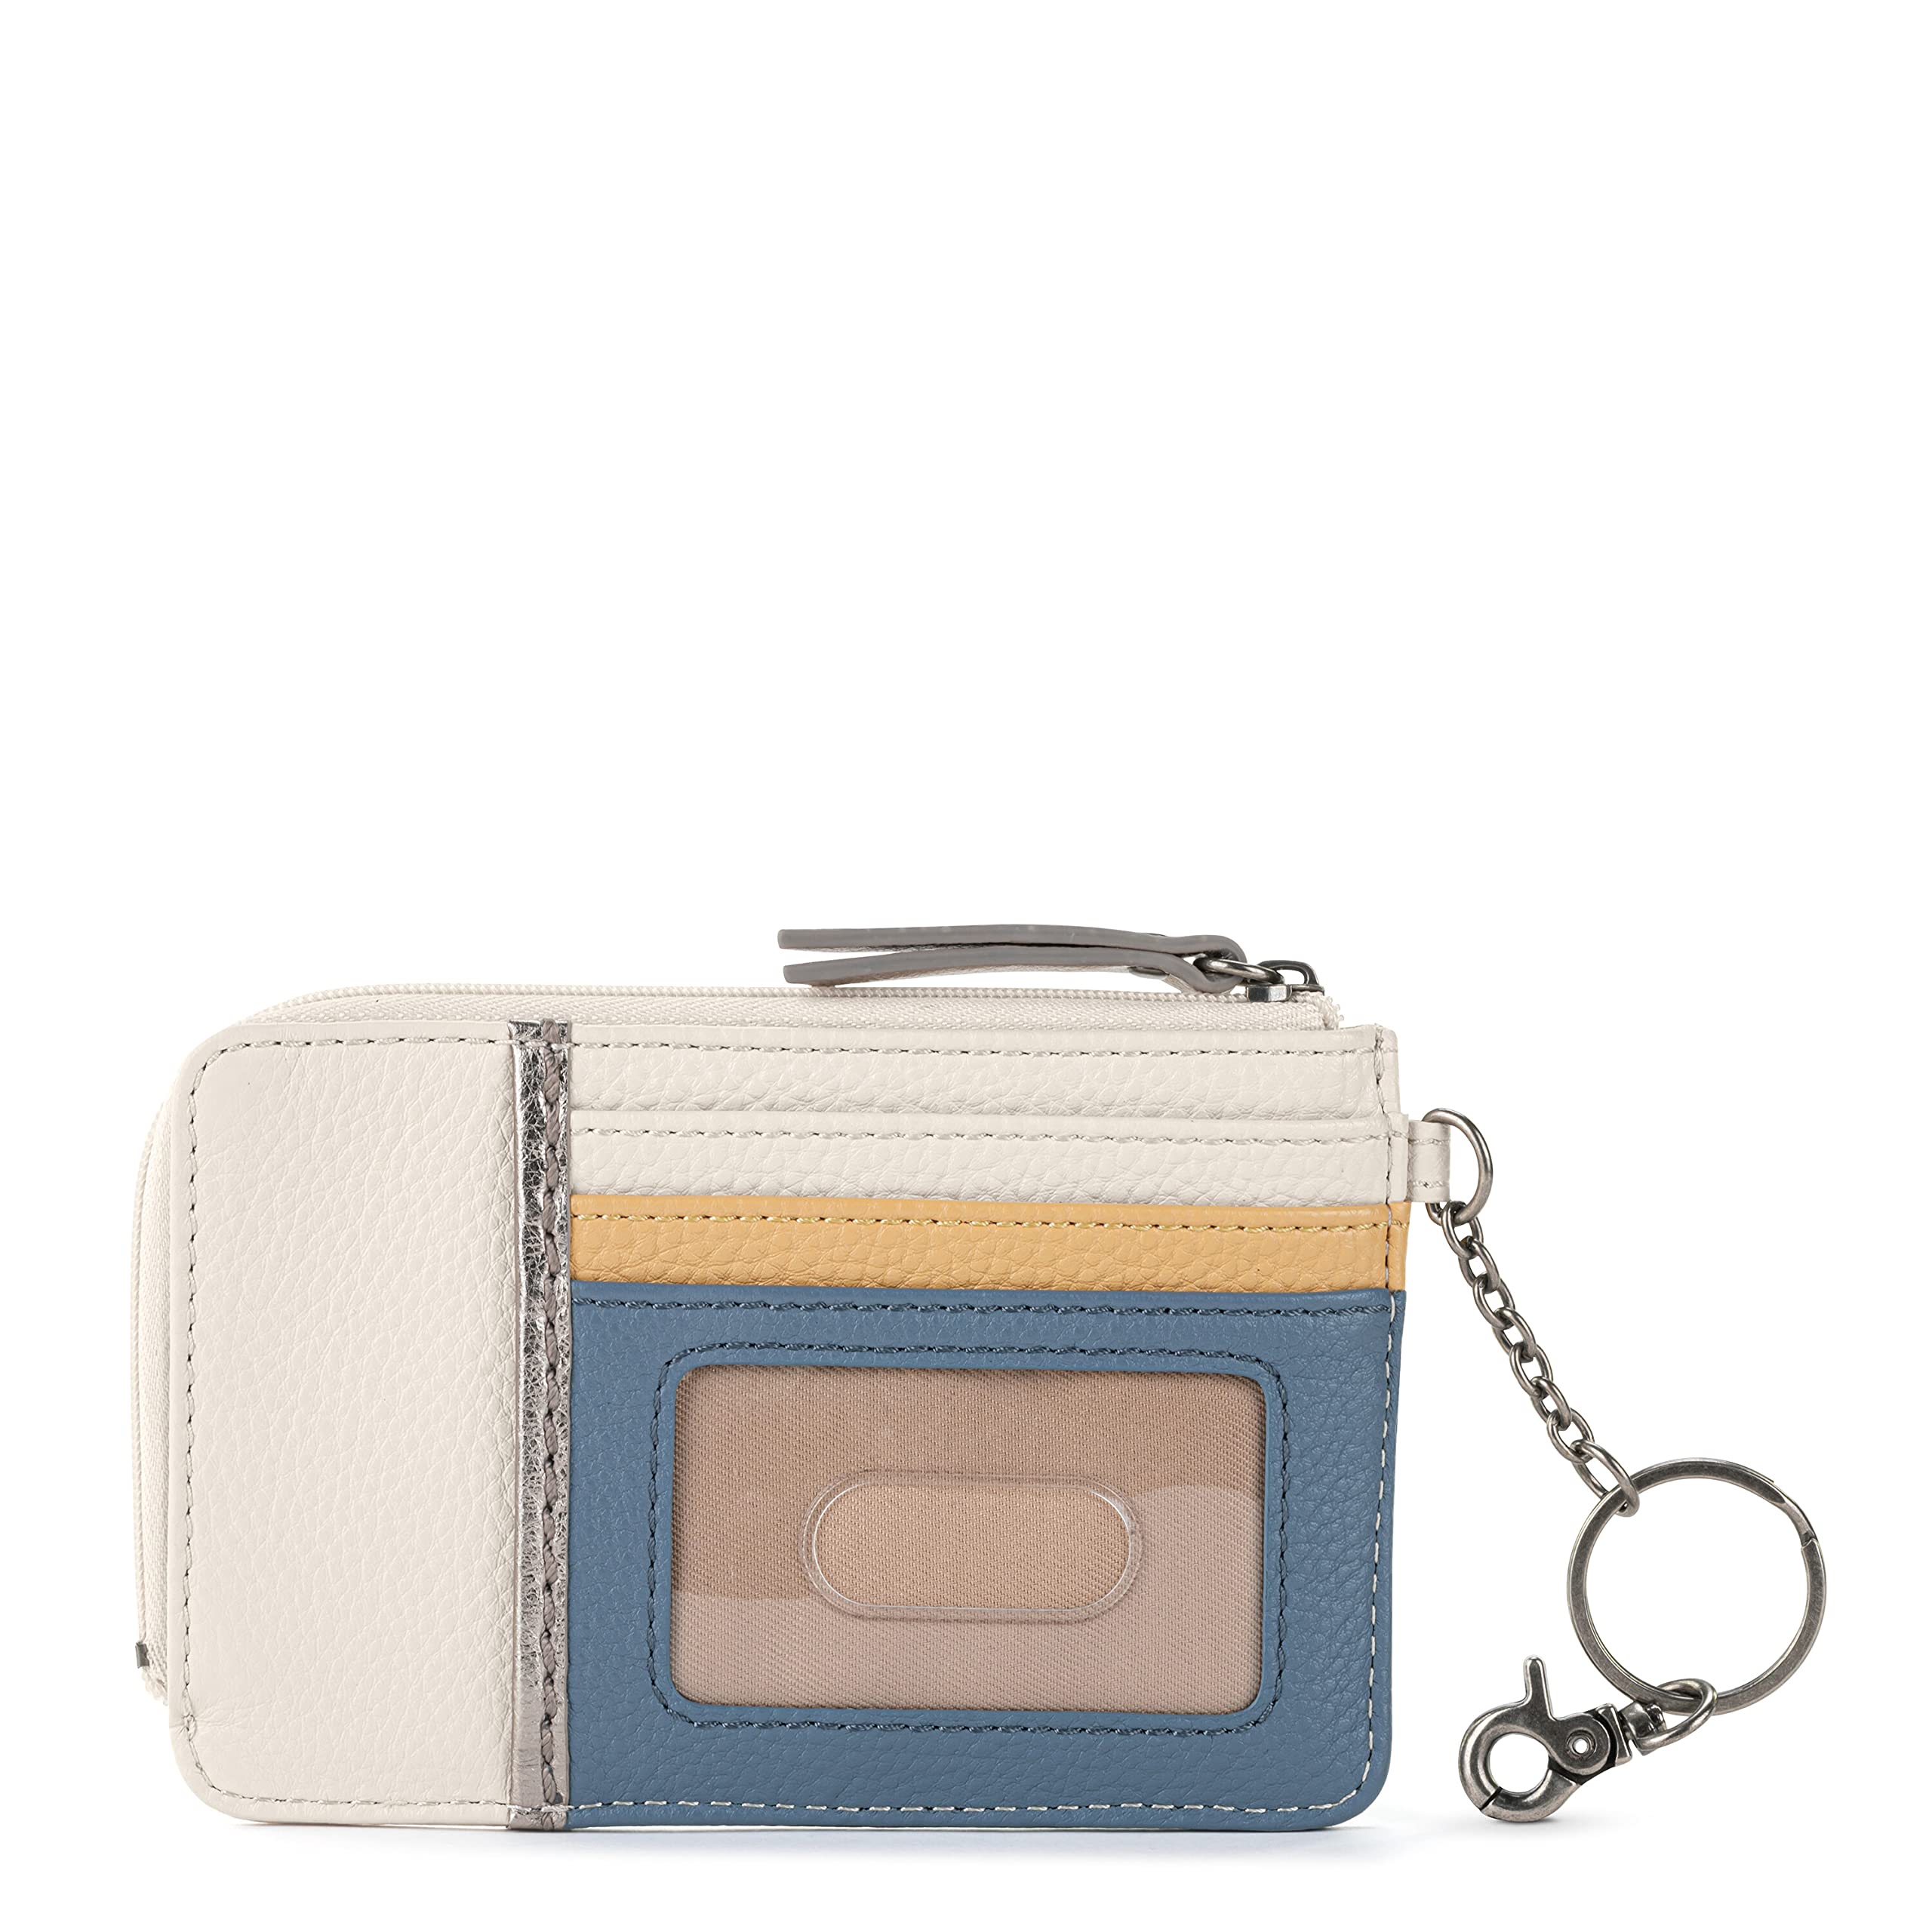 The Sak Iris Wallet in Leather, Elevated Card Holder with Keychain